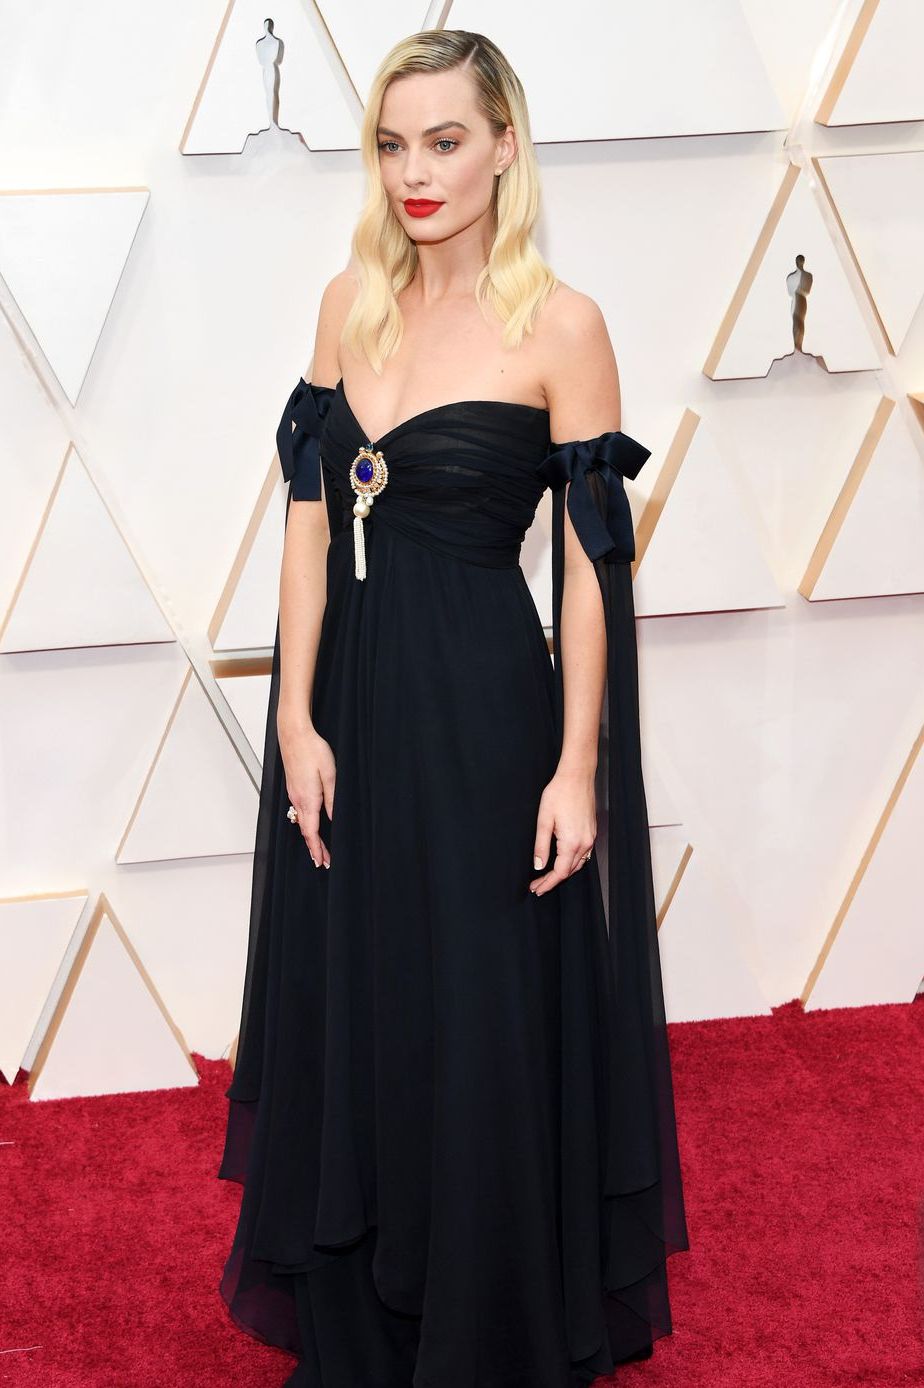 Every sustainable fashion choice made at the 2020 Oscars